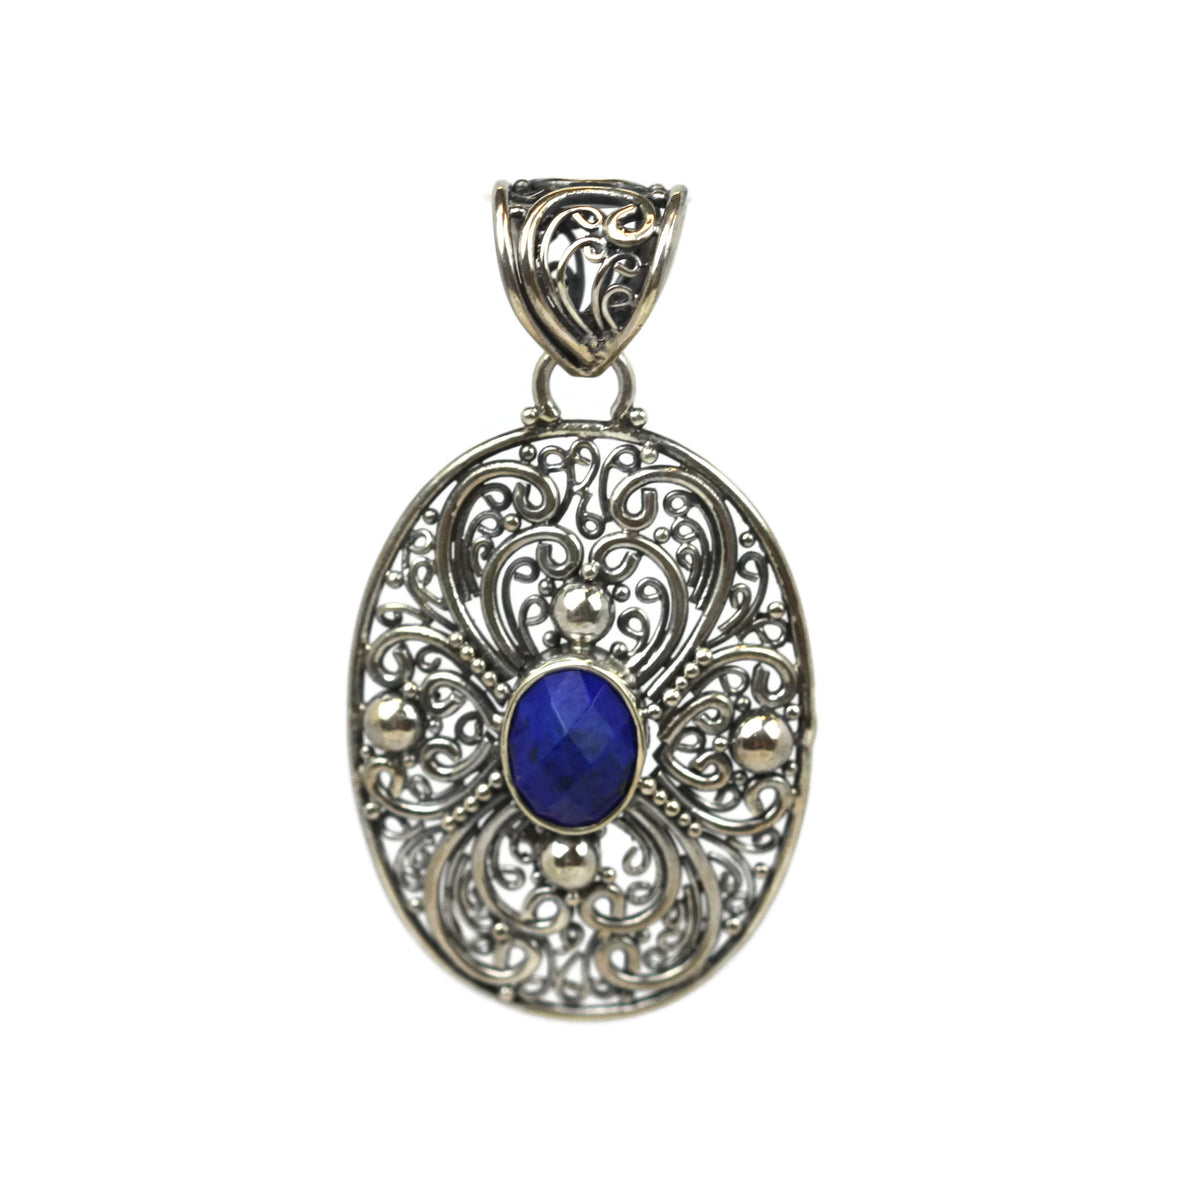 Handmade 925 Sterling Silver Antique Decorative Pendant With Oval Faceted Lapis Lazuli Gemstone